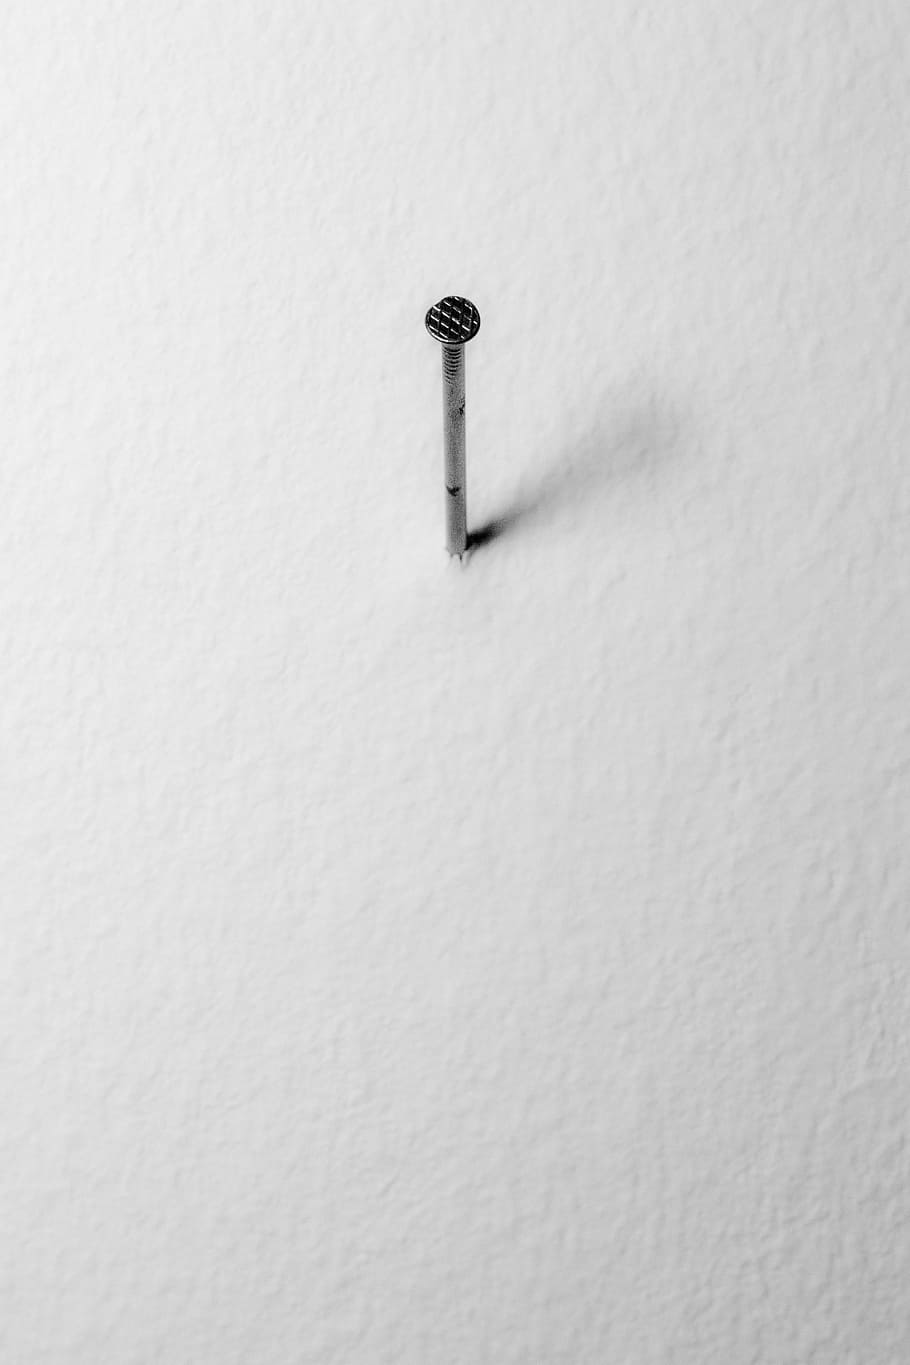 background, still life, black and white photography, simplicity, wall, nail, stability, white color, close-up, wall - building feature